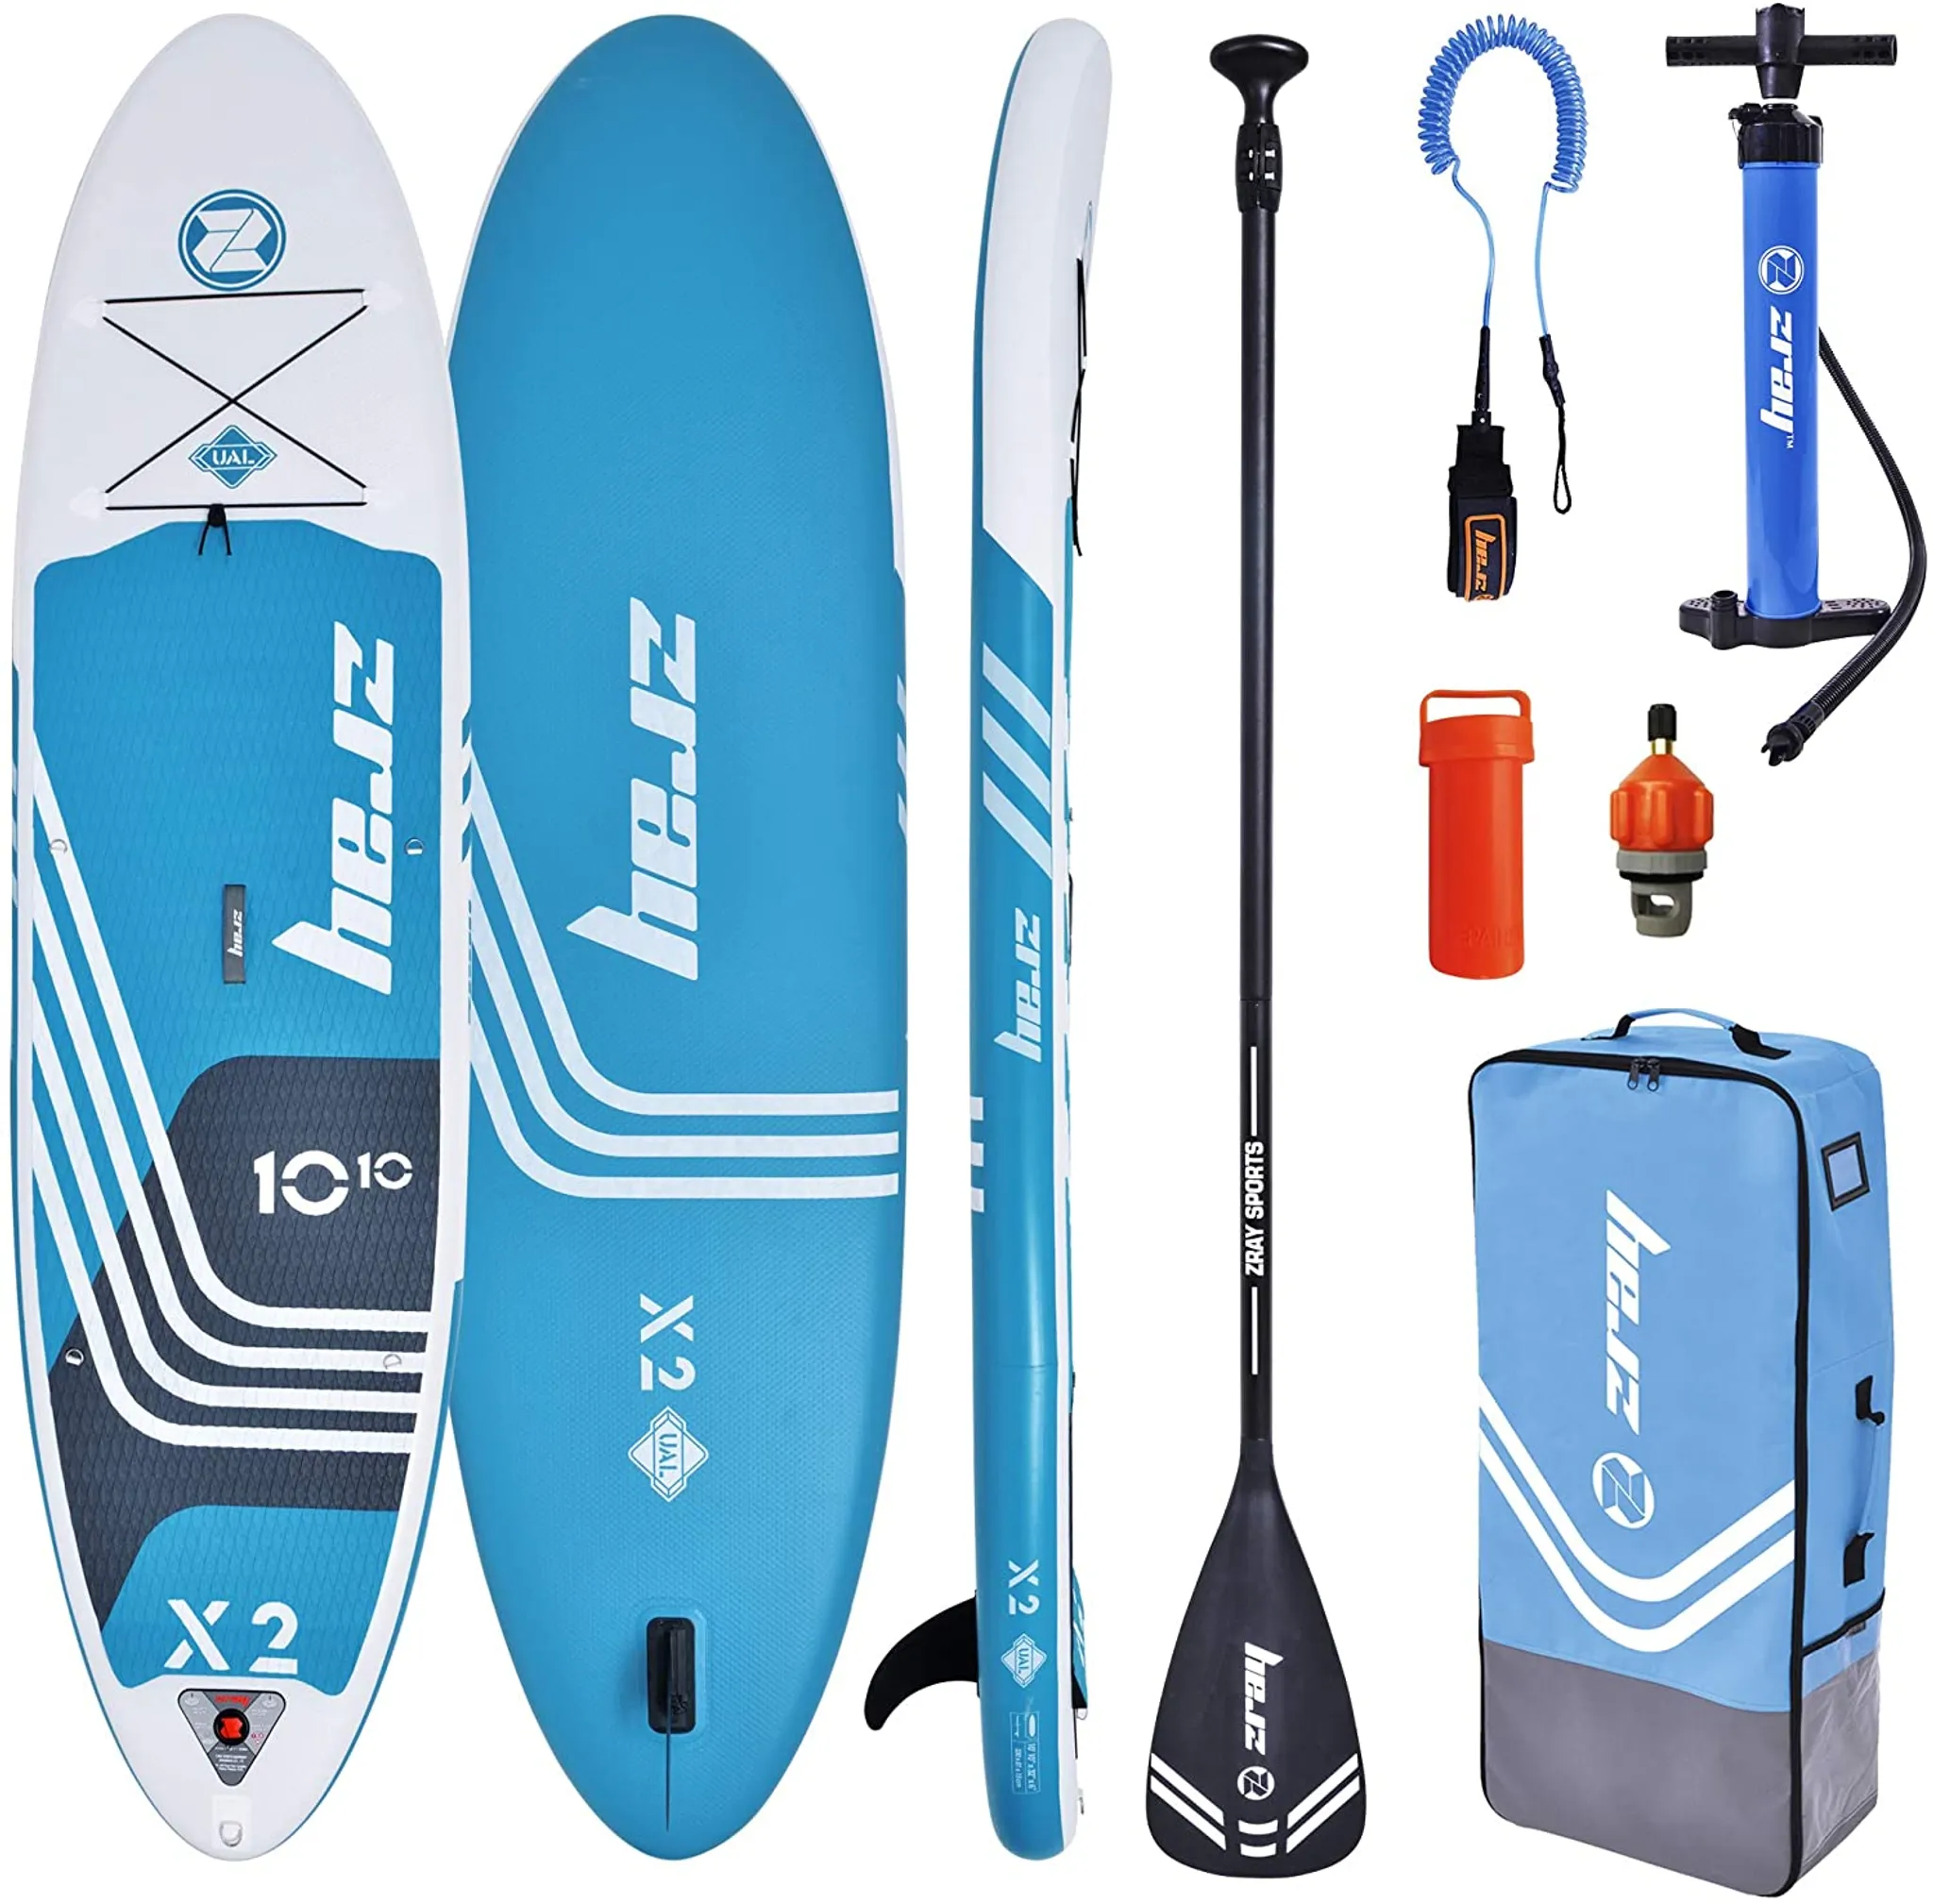 Zray X2 SUP Board Stand Paddle Up 10.10